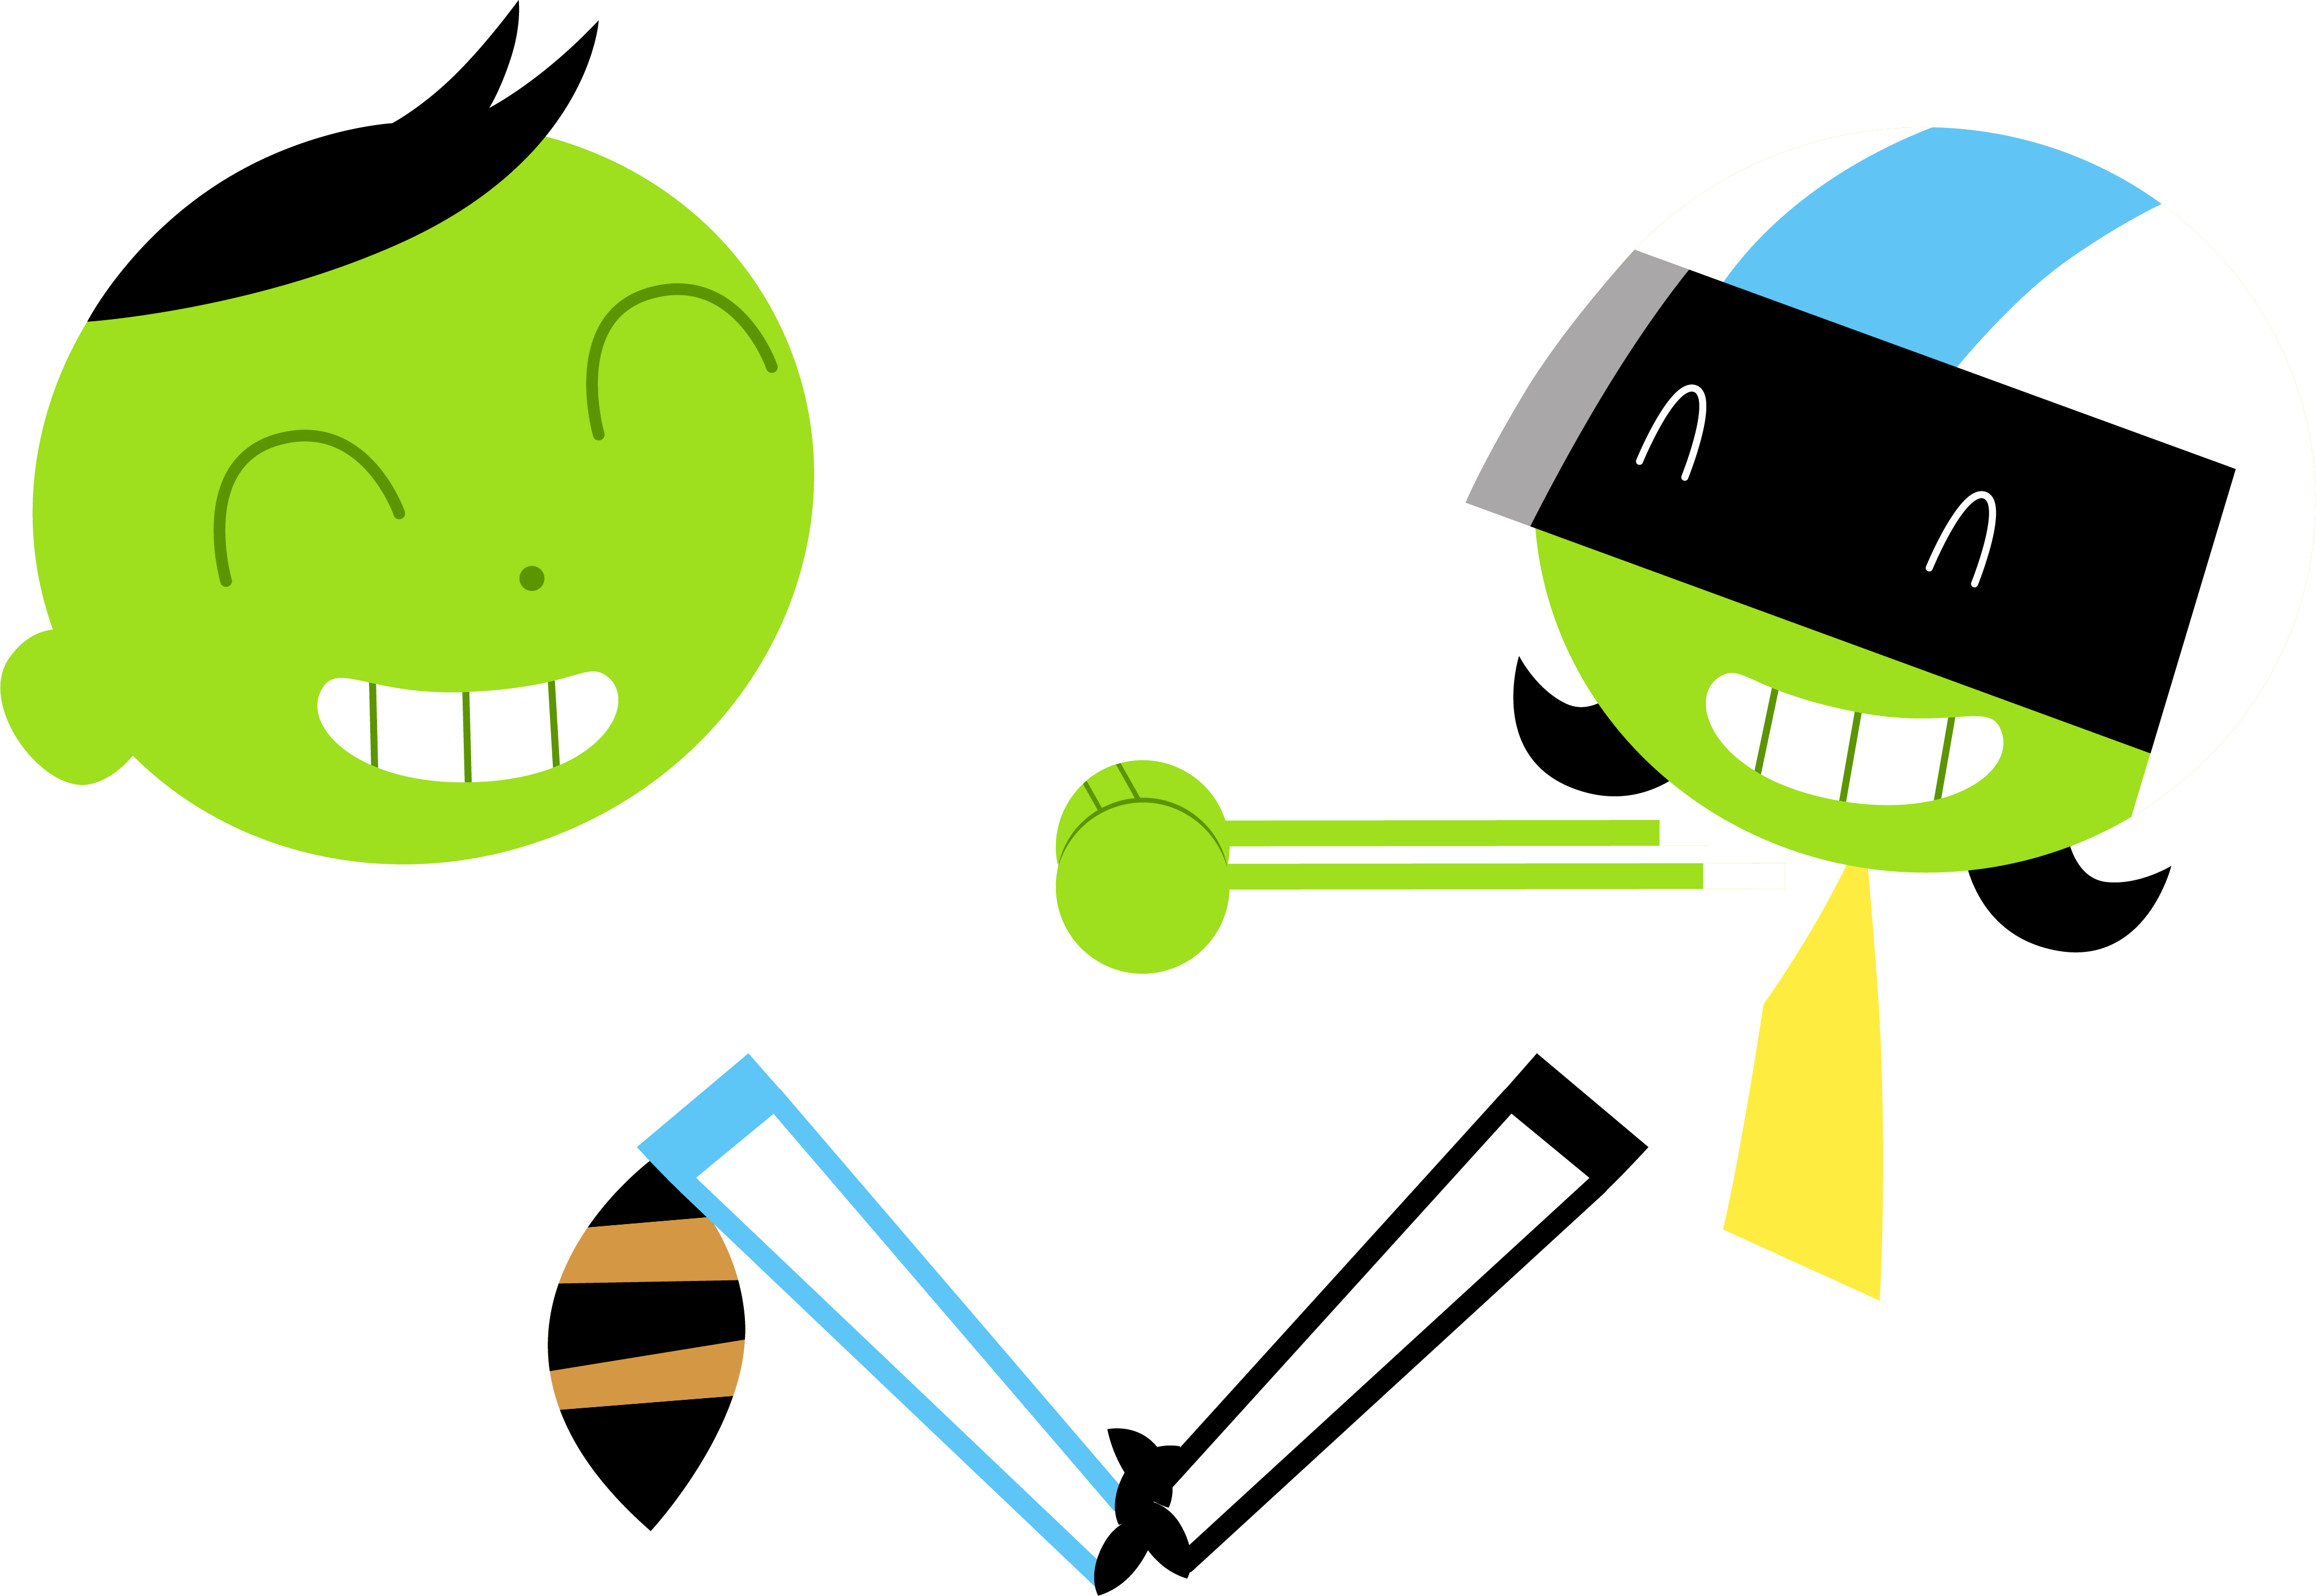 PBS Kids Dash and Dot (Transparent) by pingguolover on DeviantArt